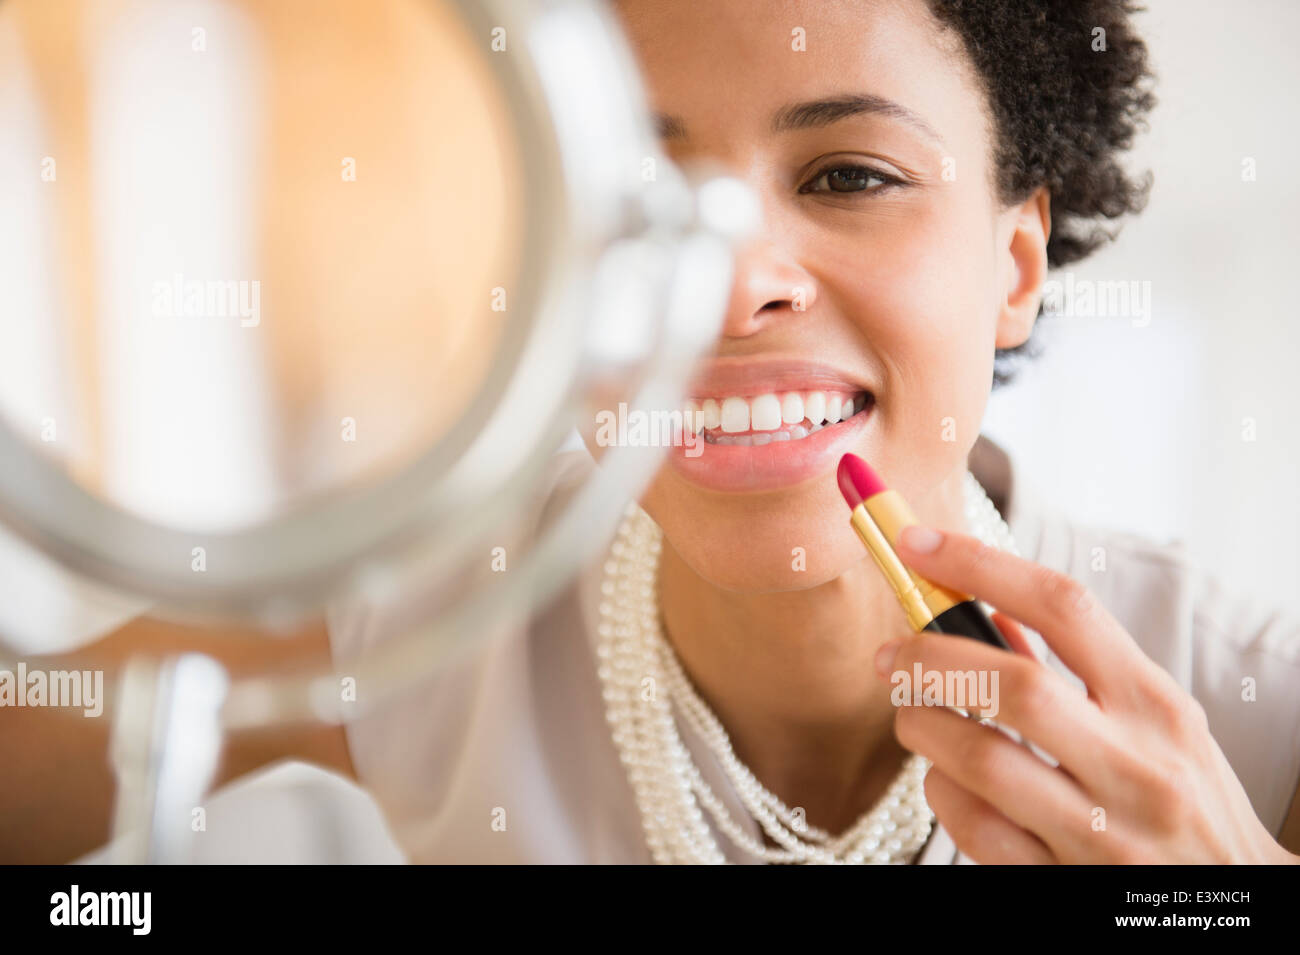 Black woman applying makeup in mirror Banque D'Images